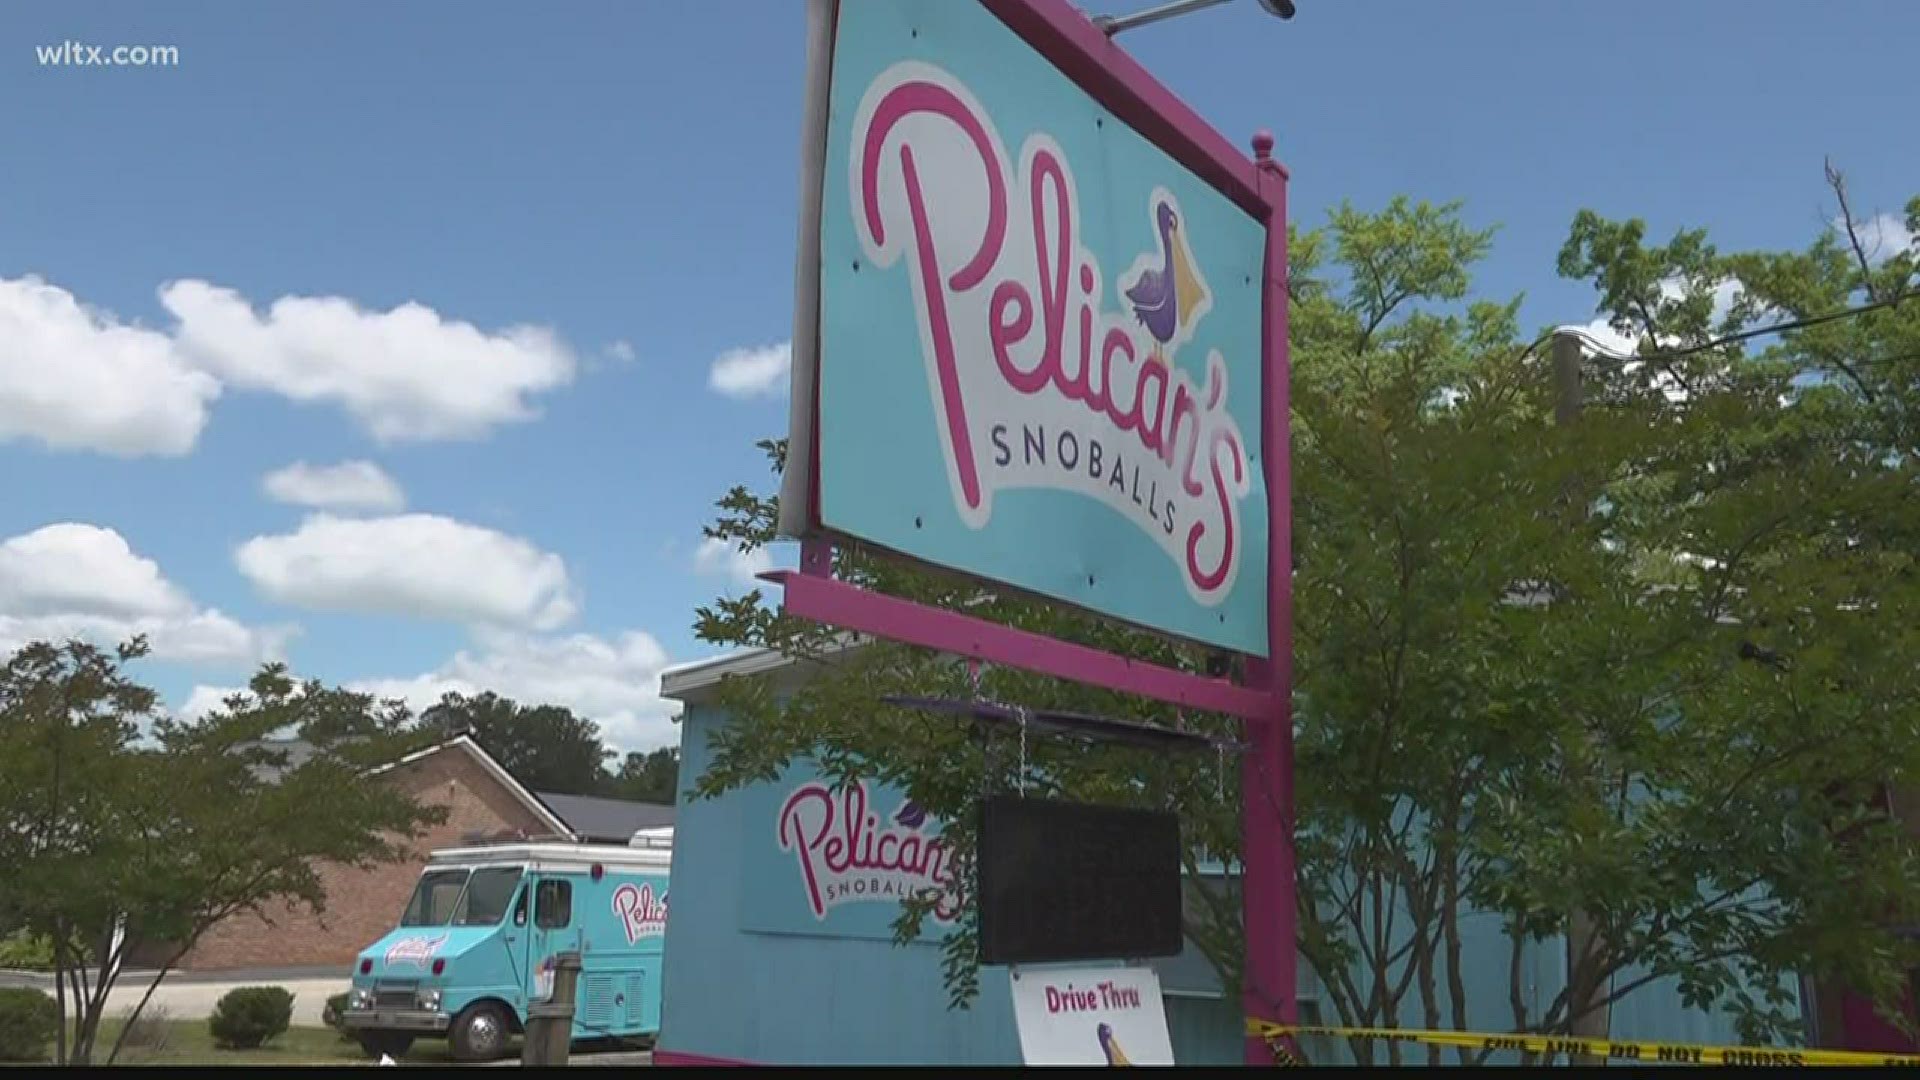 Mungo Homes has stepped up to rebuild the Pelican's Snoballs that was robbed and burned down earlier this month.